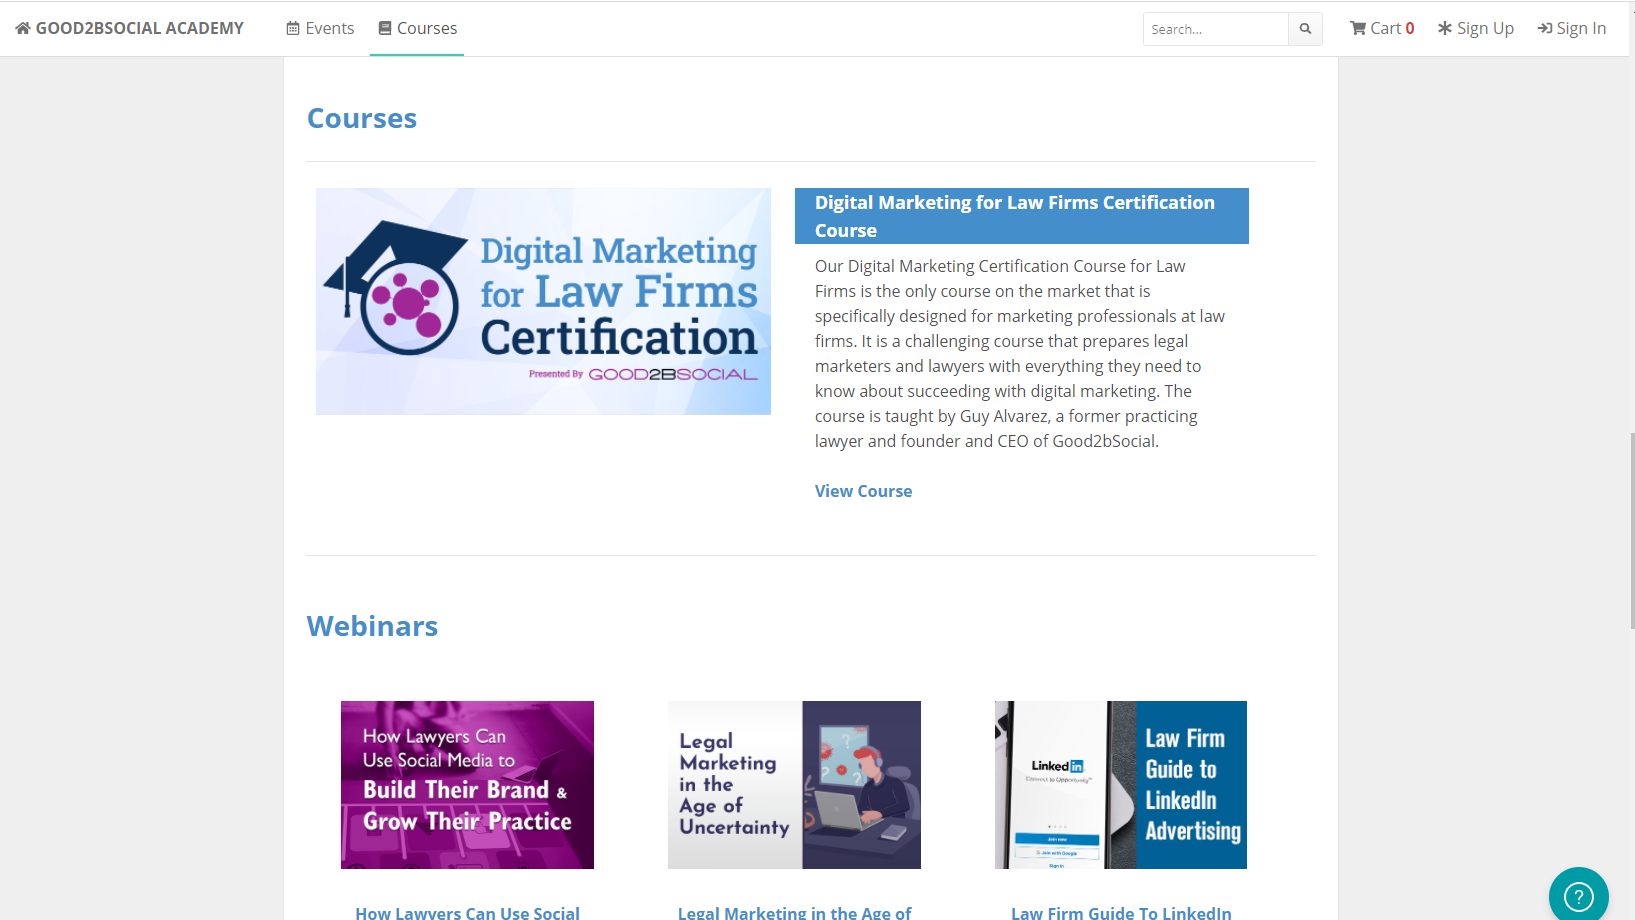 Want to Learn Legal Marketing? This New On-Demand Platform Can Help